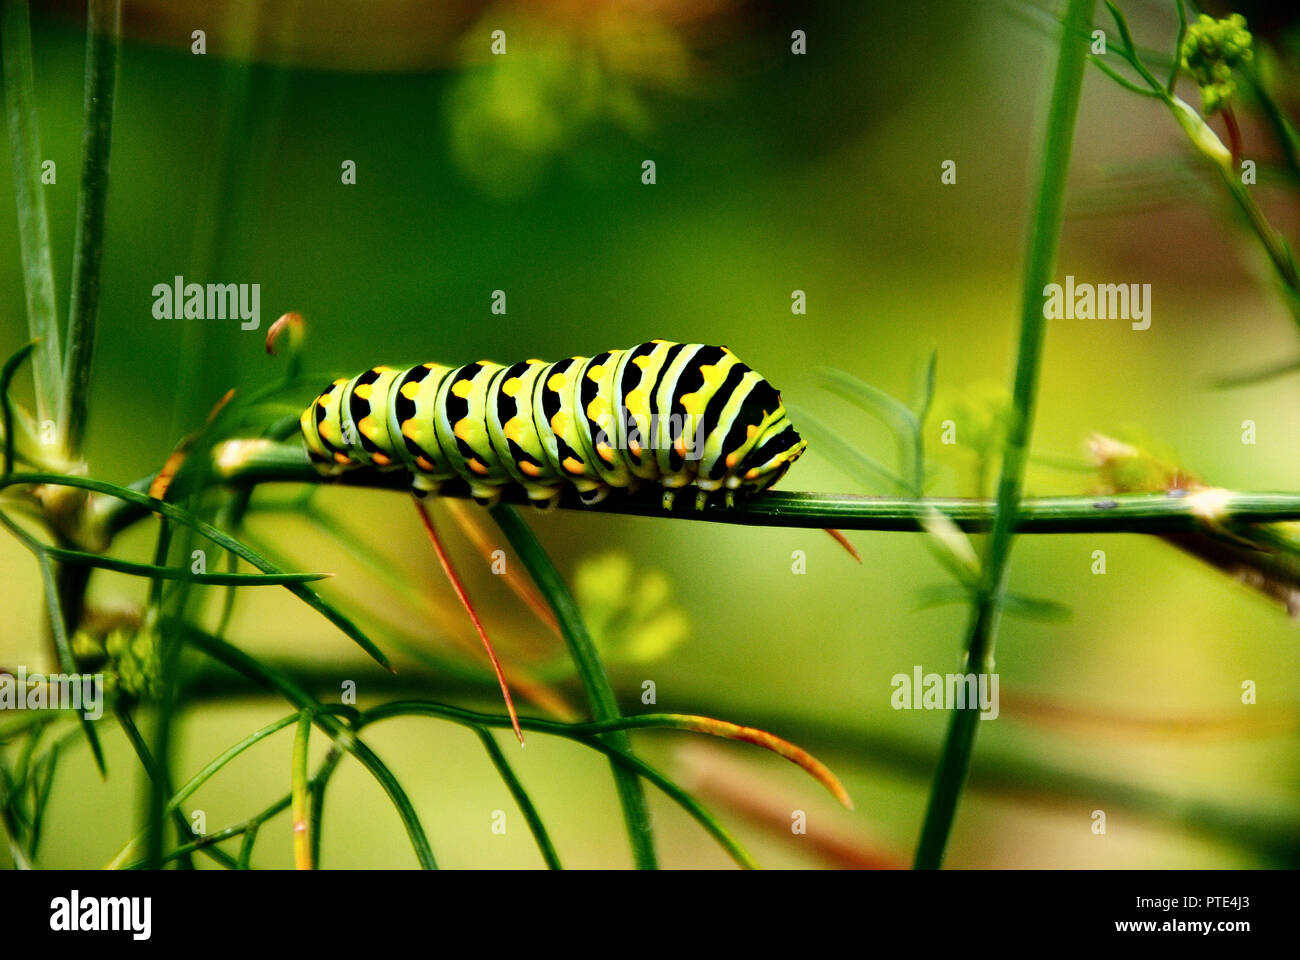 The Old World swallowtail or Papilio Machaon caterpillar feeding and crawling on a fennel plant in the garden, with a green blurry background Stock Photo